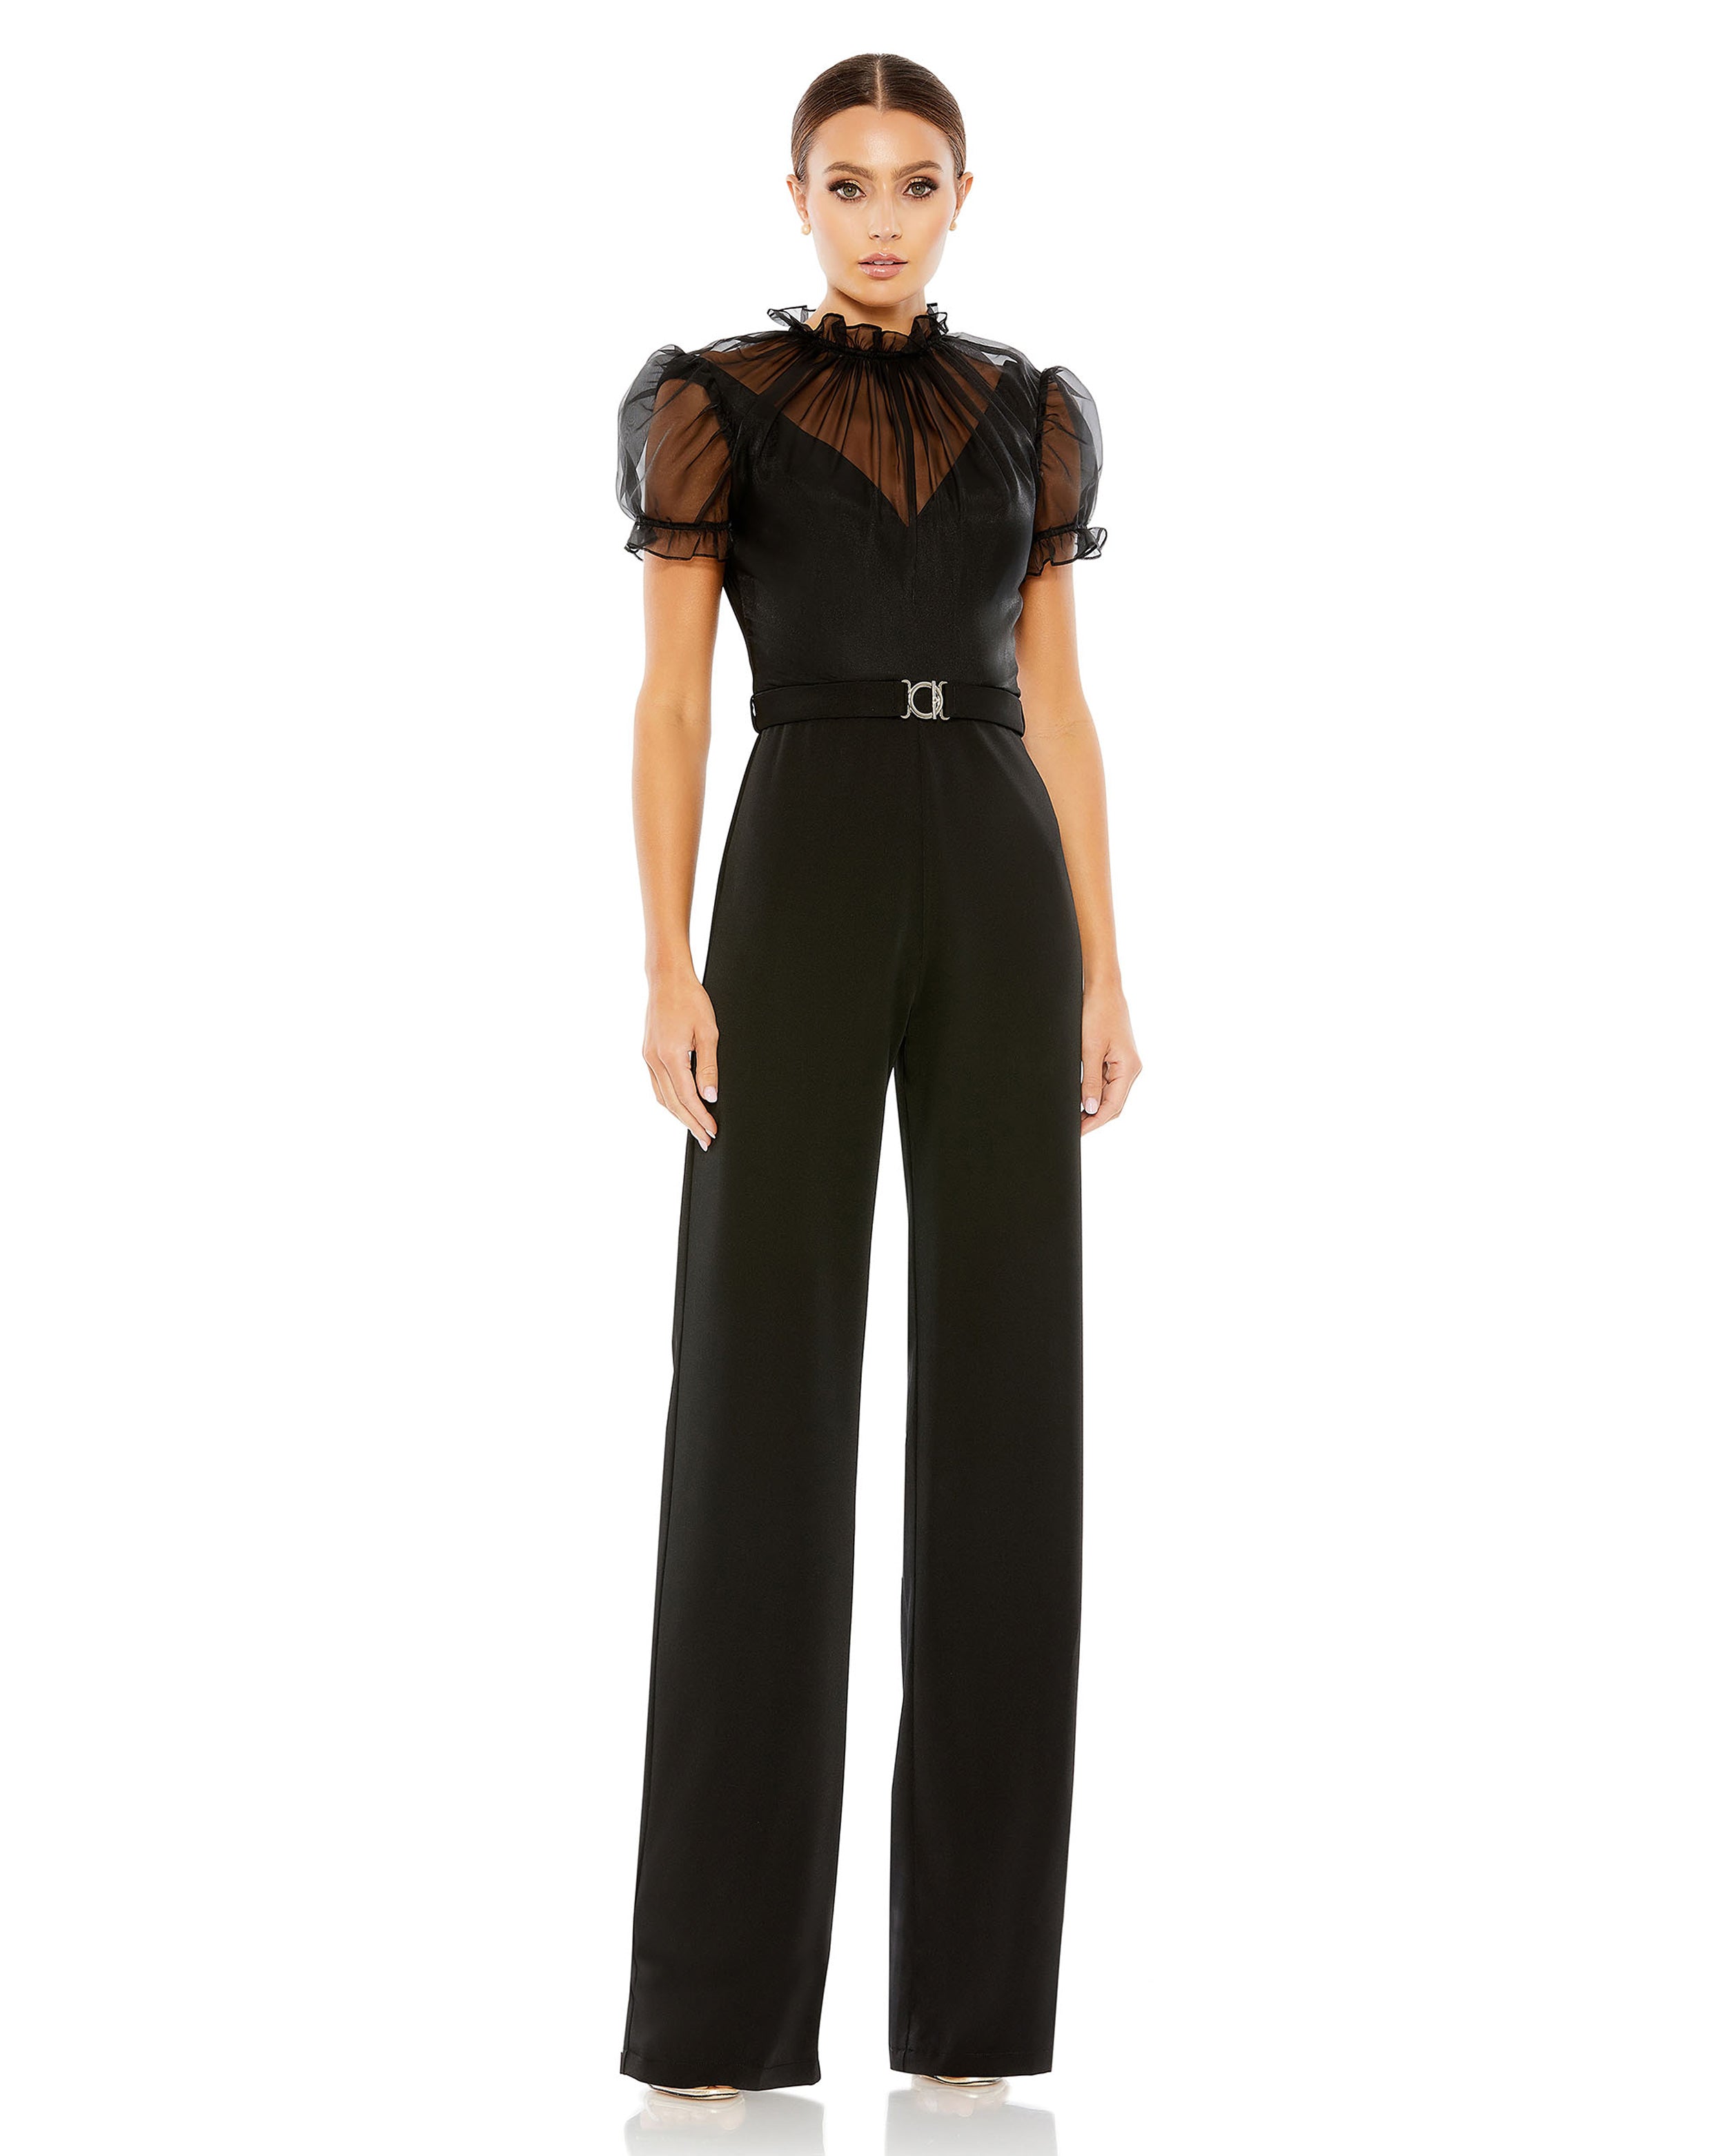 Image of Belted Illusion High Neck Cap Sleeve Jumpsuit